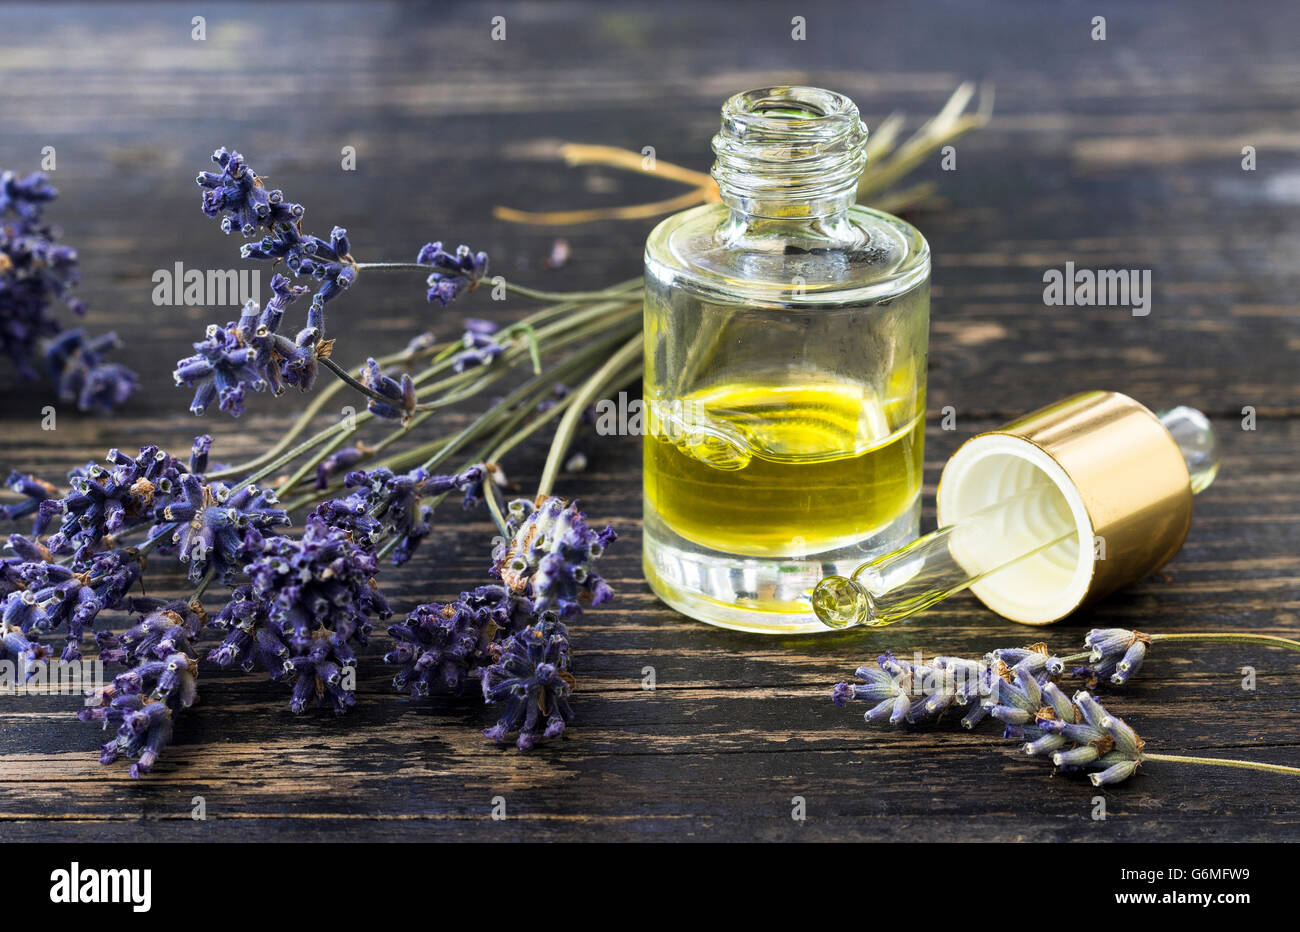 Aromatherapy oil and lavender Stock Photo